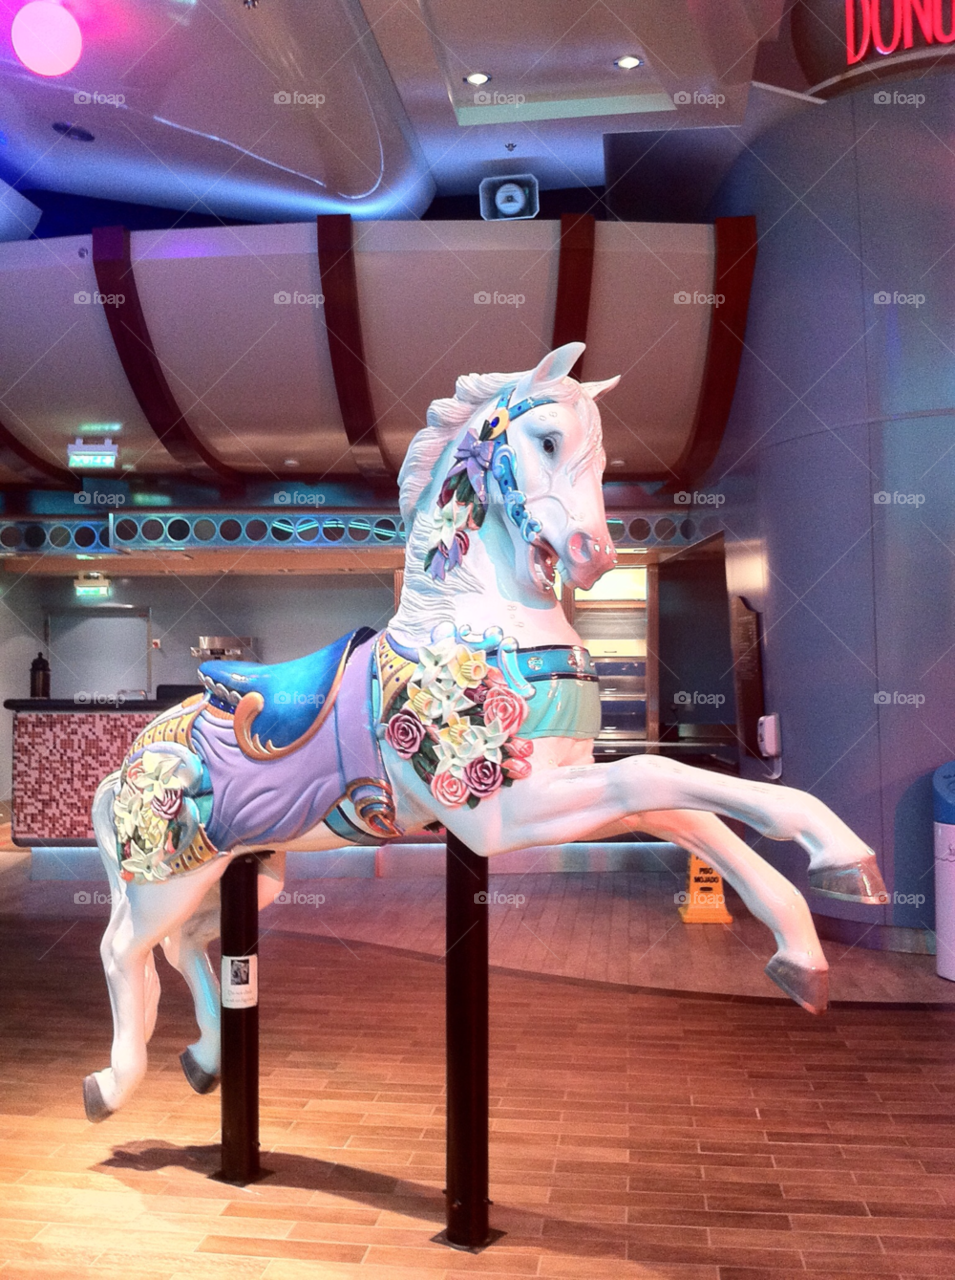 carnival oasis of the seas horse model by jamez870